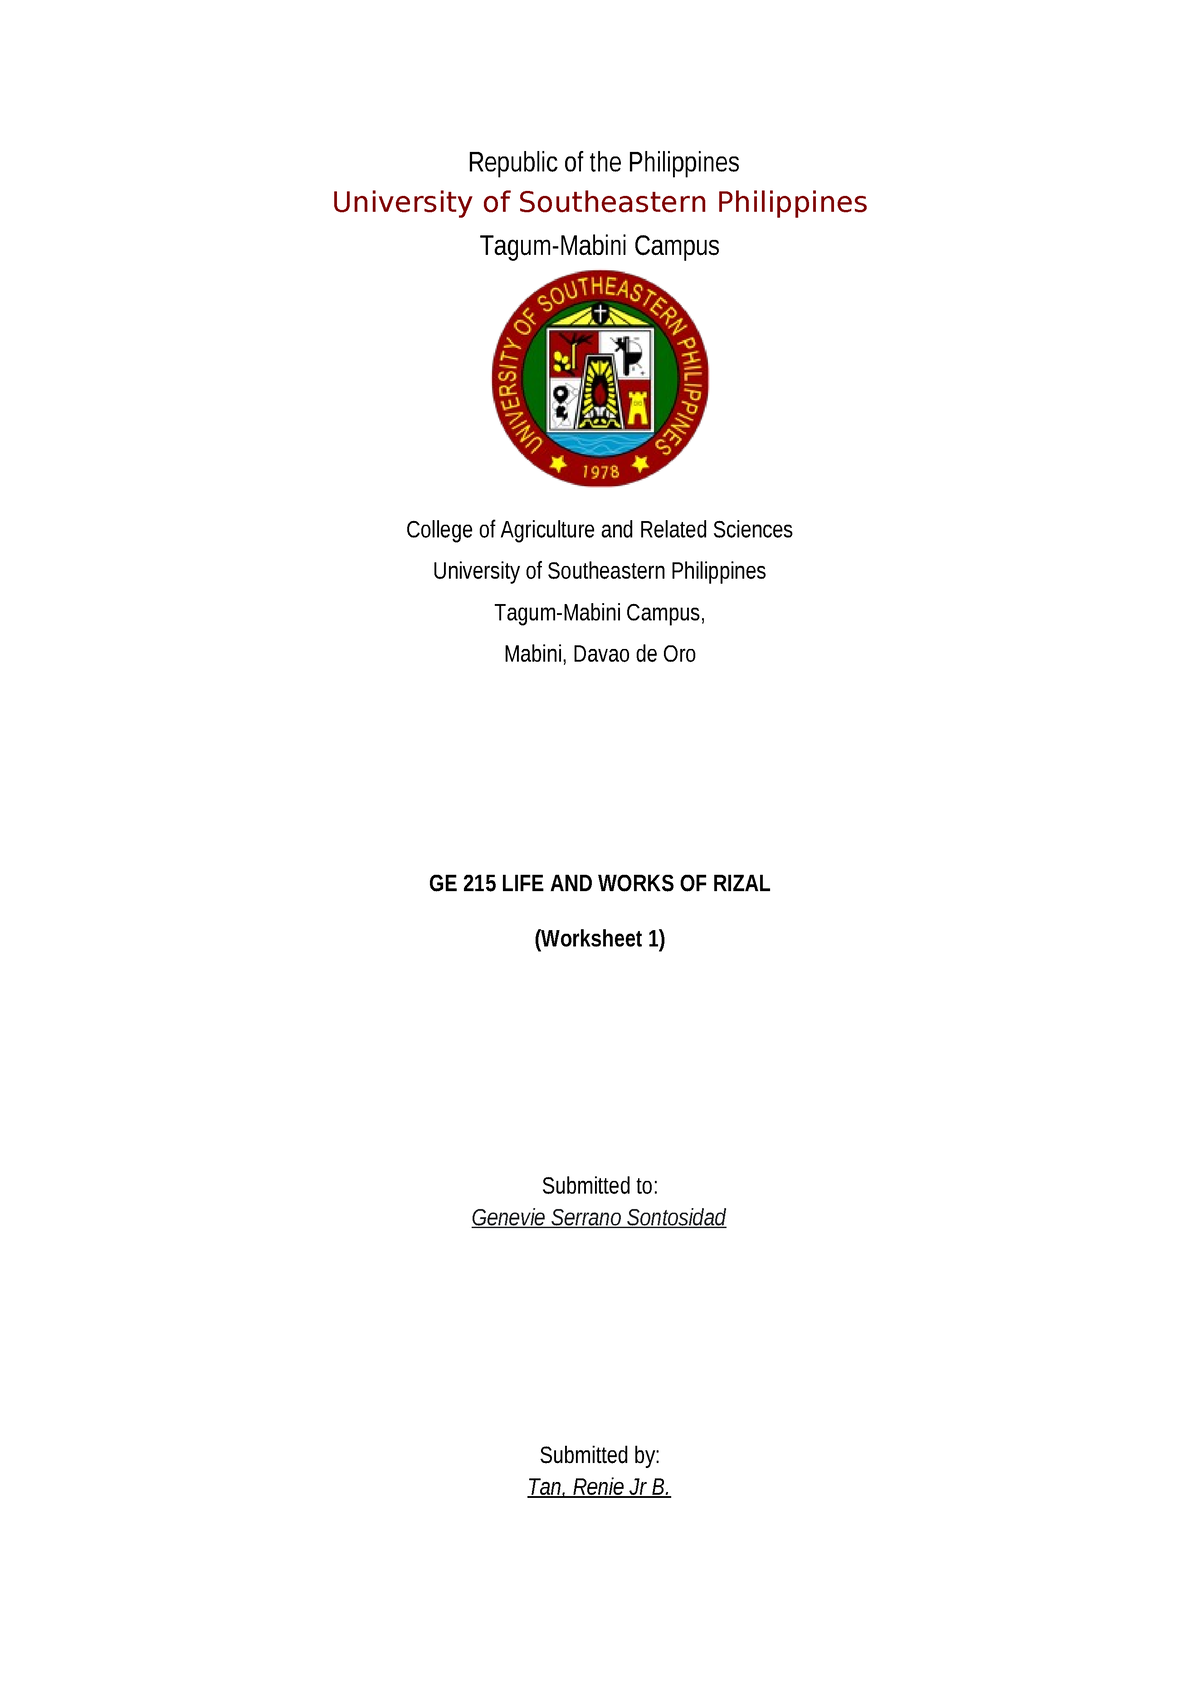 GE215 worksheet - thanks - Republic of the Philippines University of ...